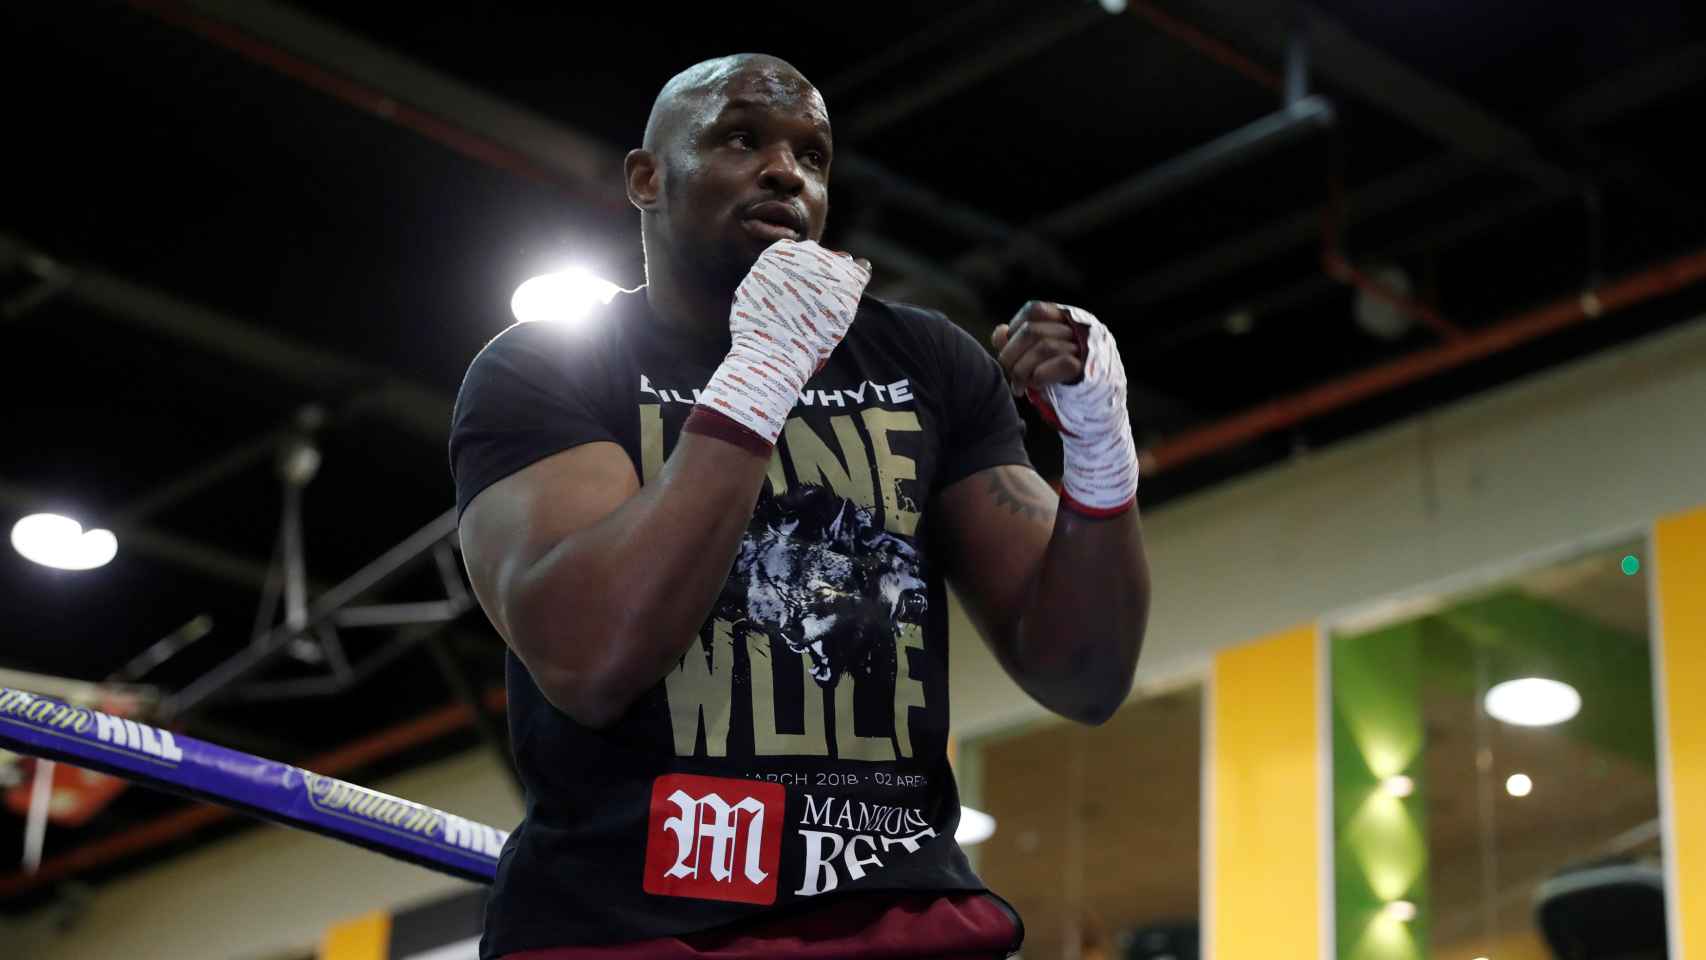 Dillian Whyte entrena antes del combate.